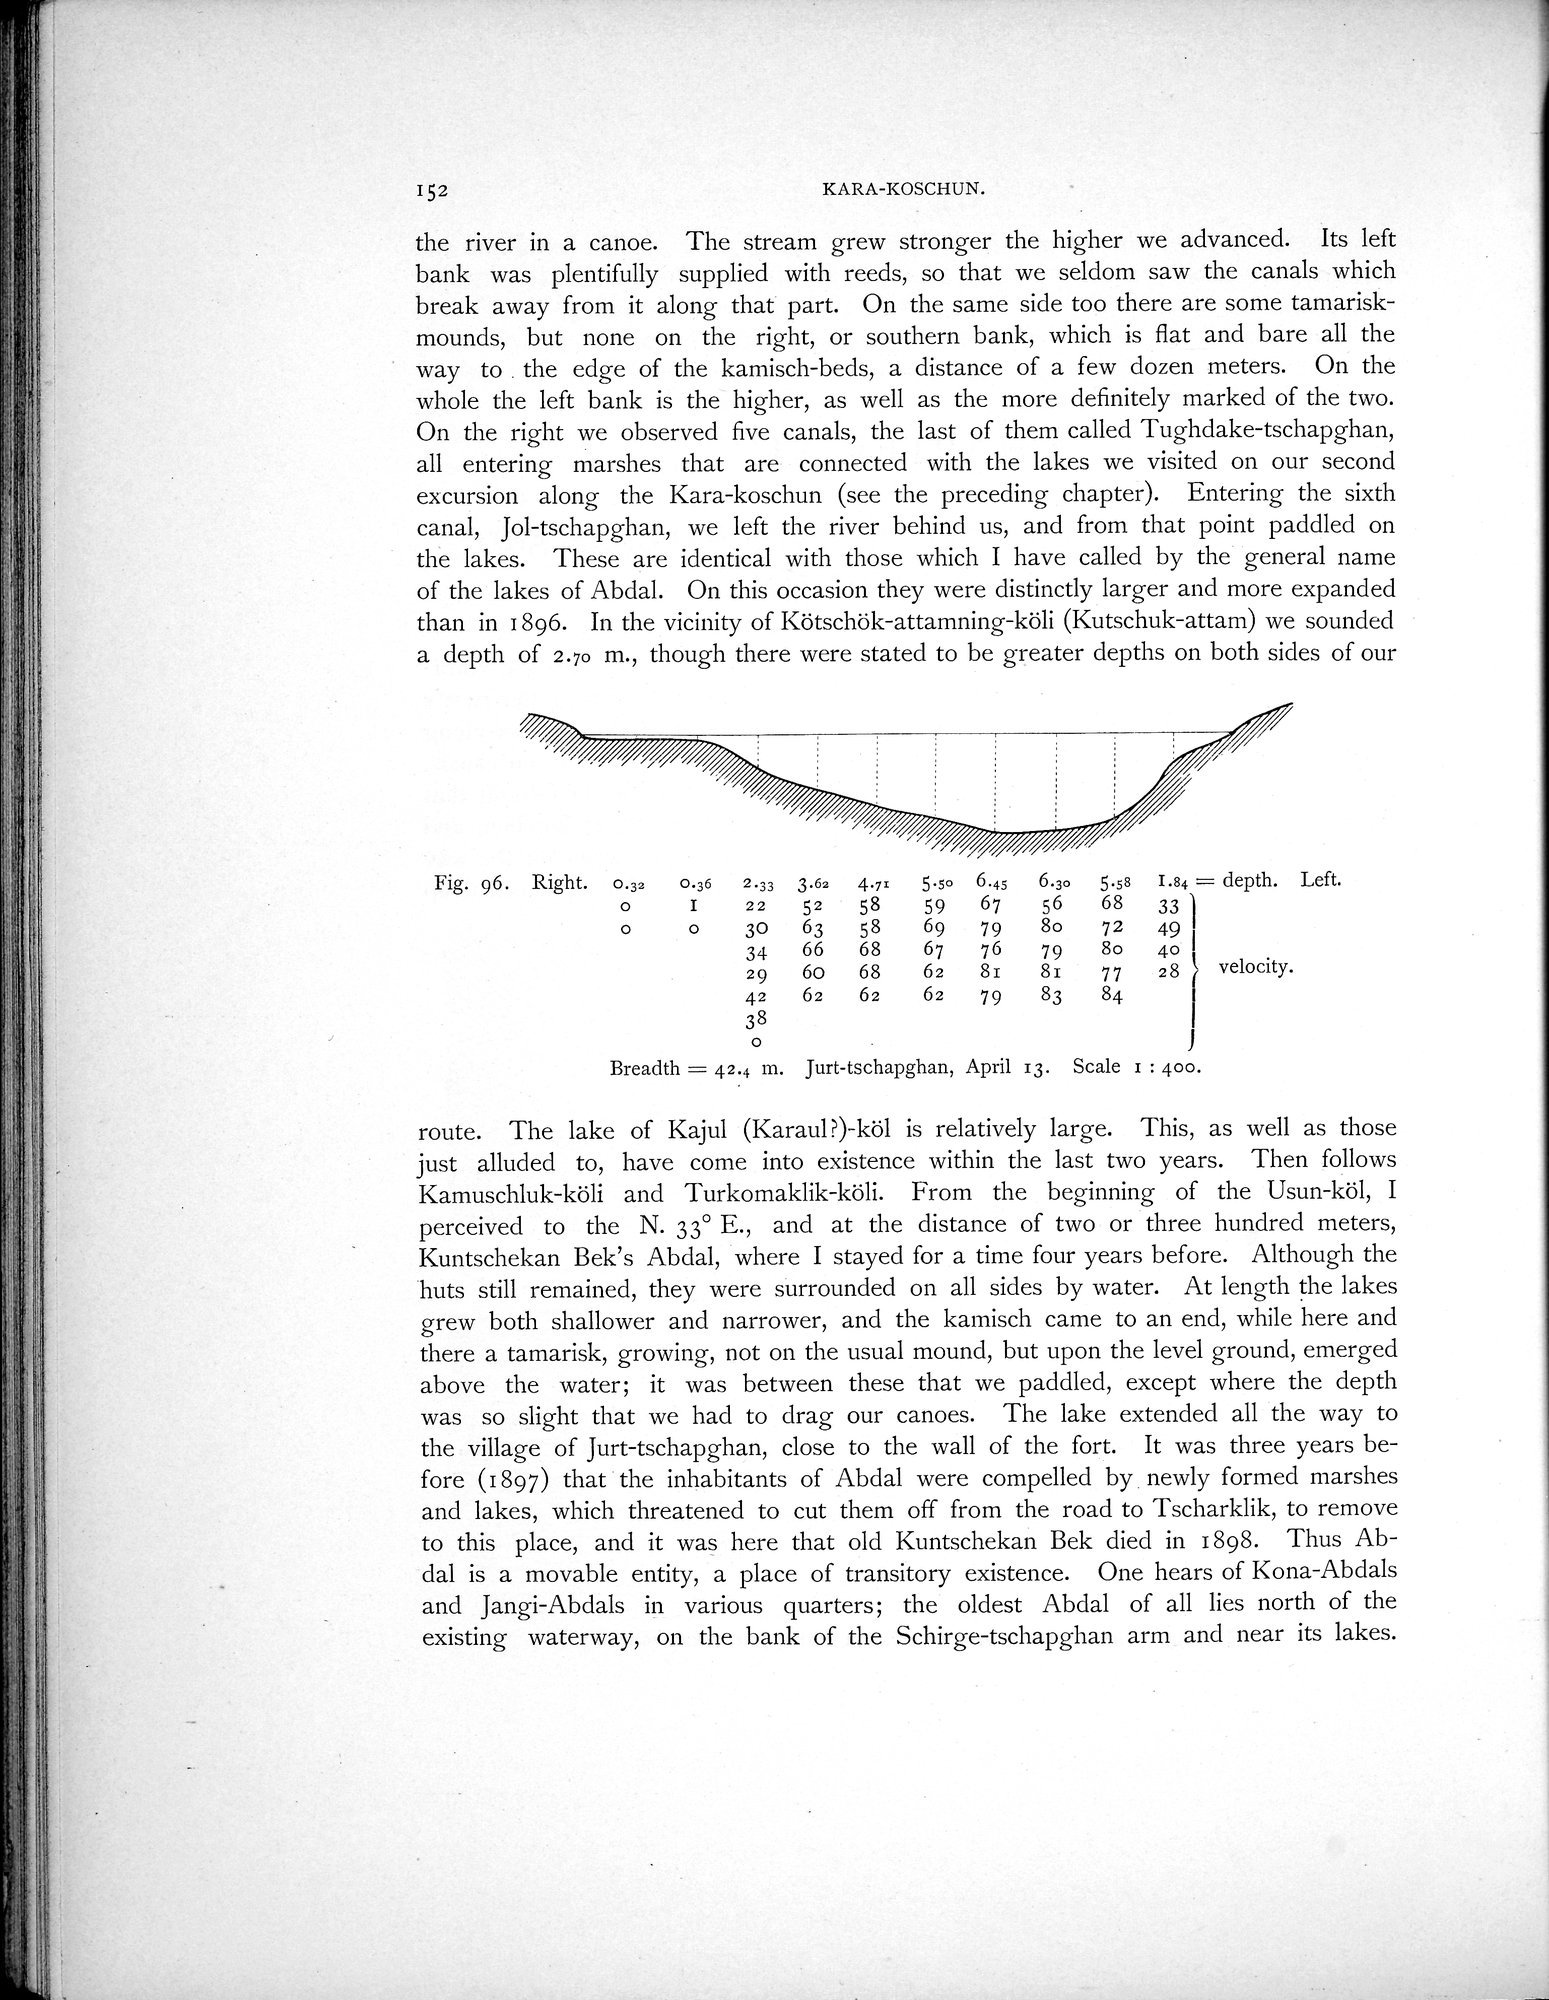 Scientific Results of a Journey in Central Asia, 1899-1902 : vol.2 / 186 ページ（白黒高解像度画像）